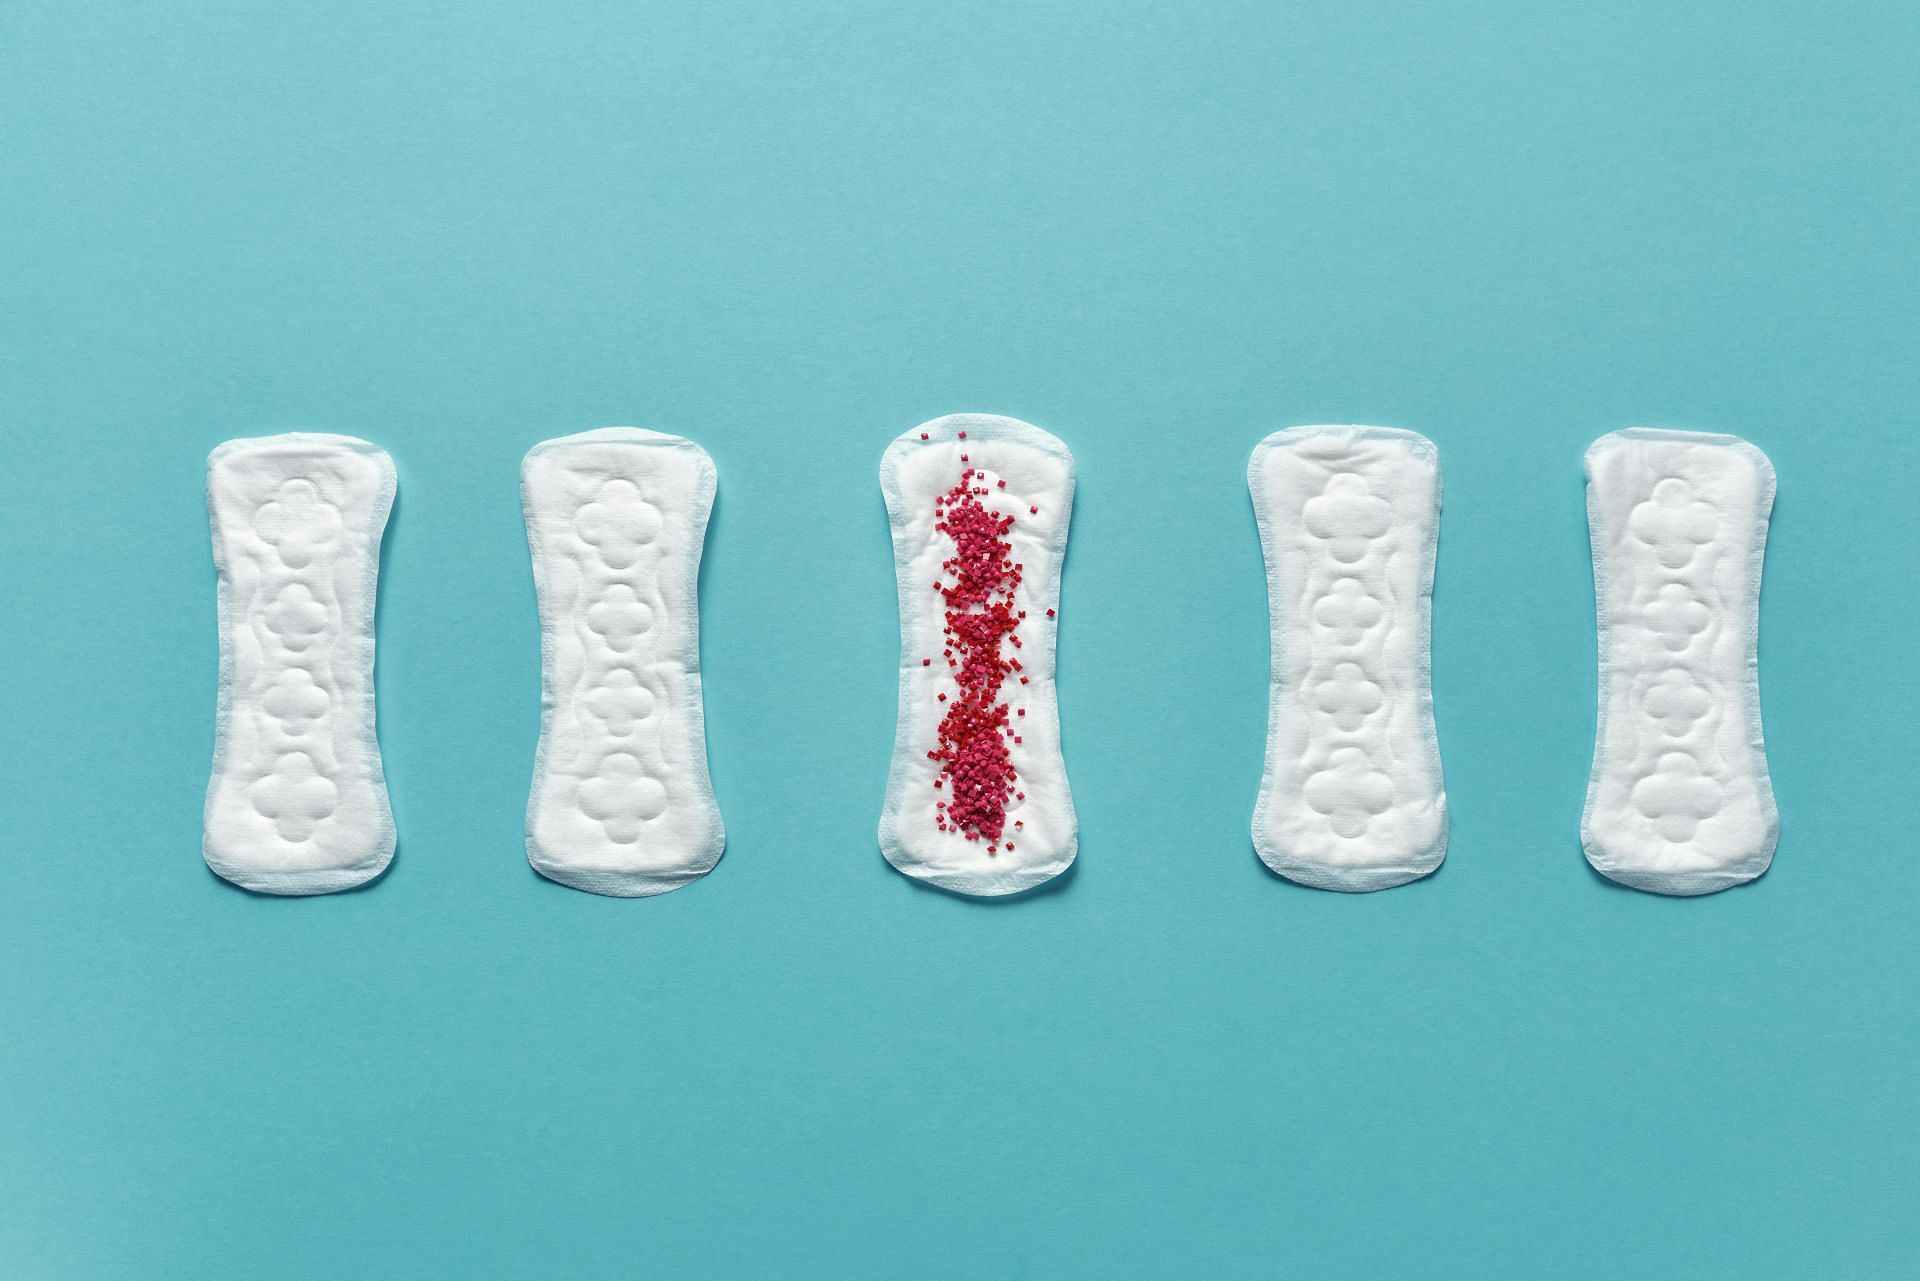 How to delay your period (image sourced via Pexels / Photo by cliff booth)